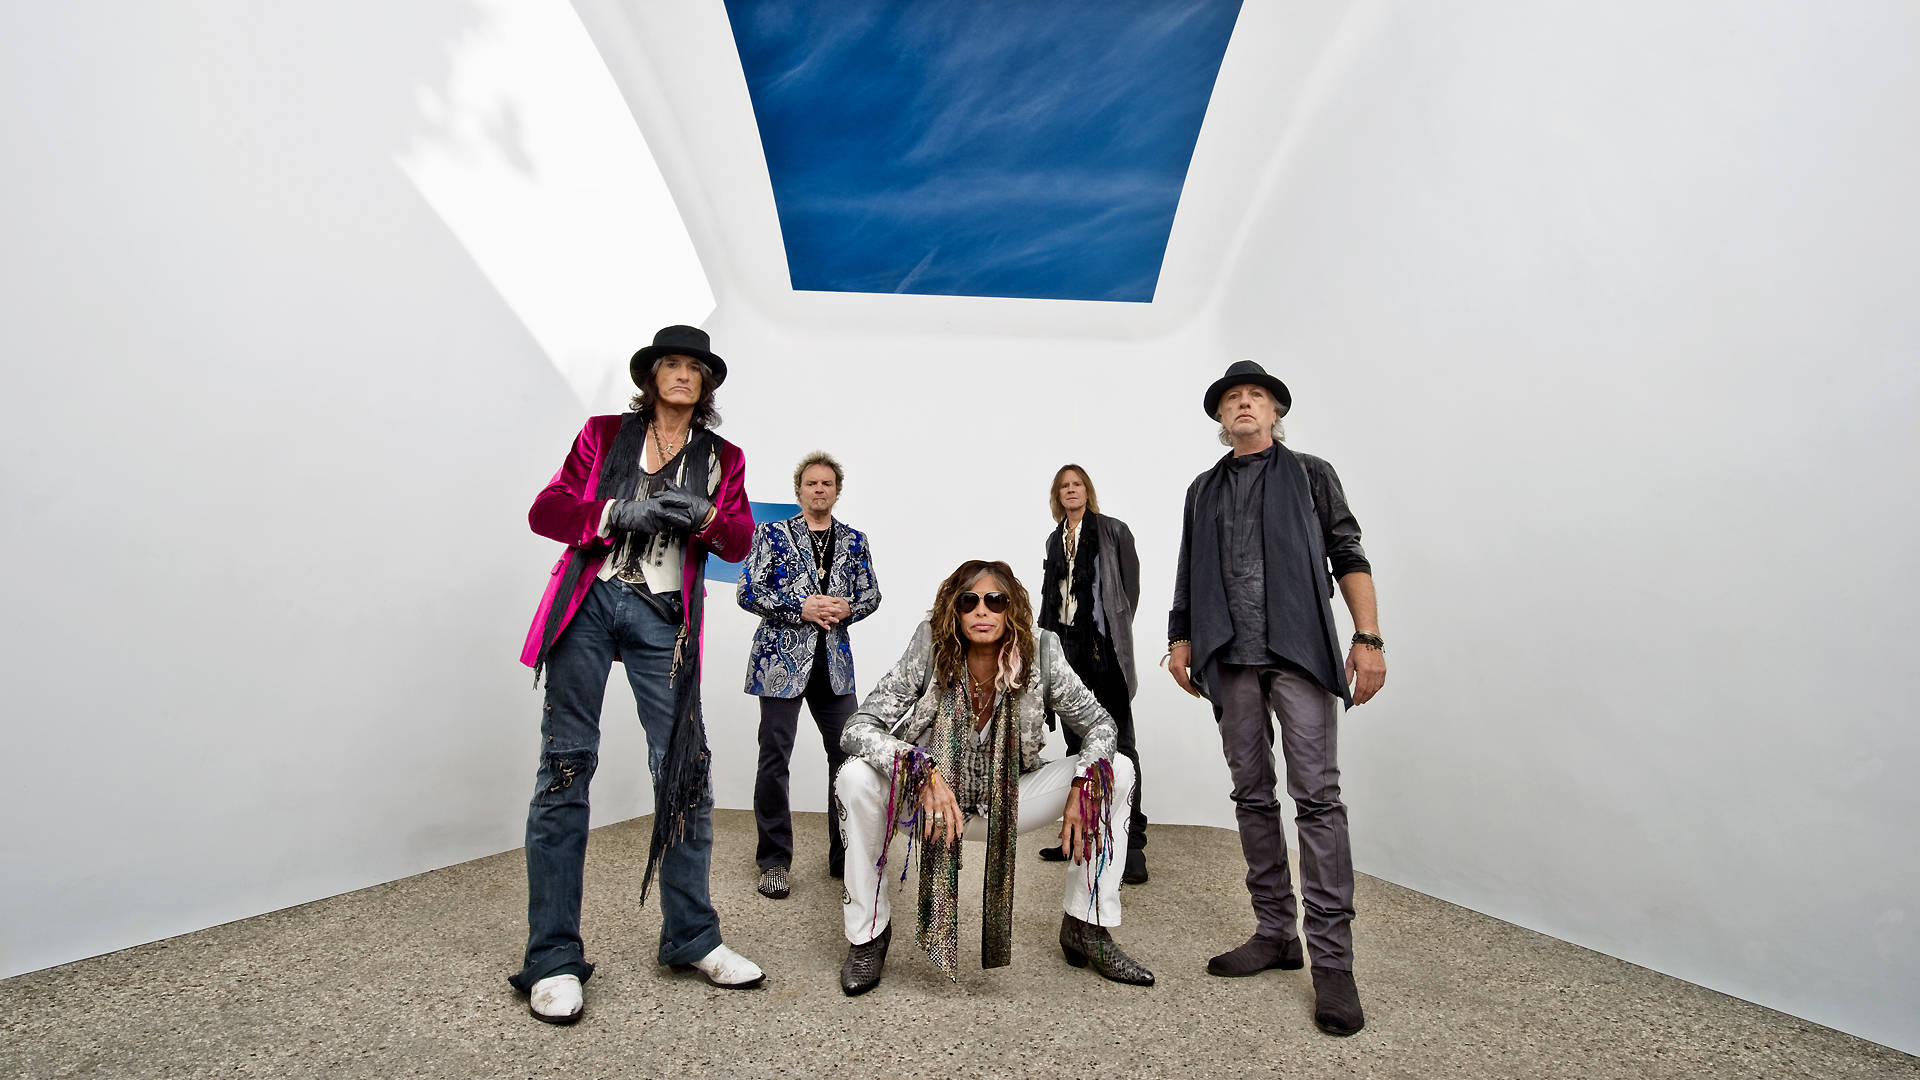 Legendary Aerosmith Group in a Classic Band Photoshoot Wallpaper